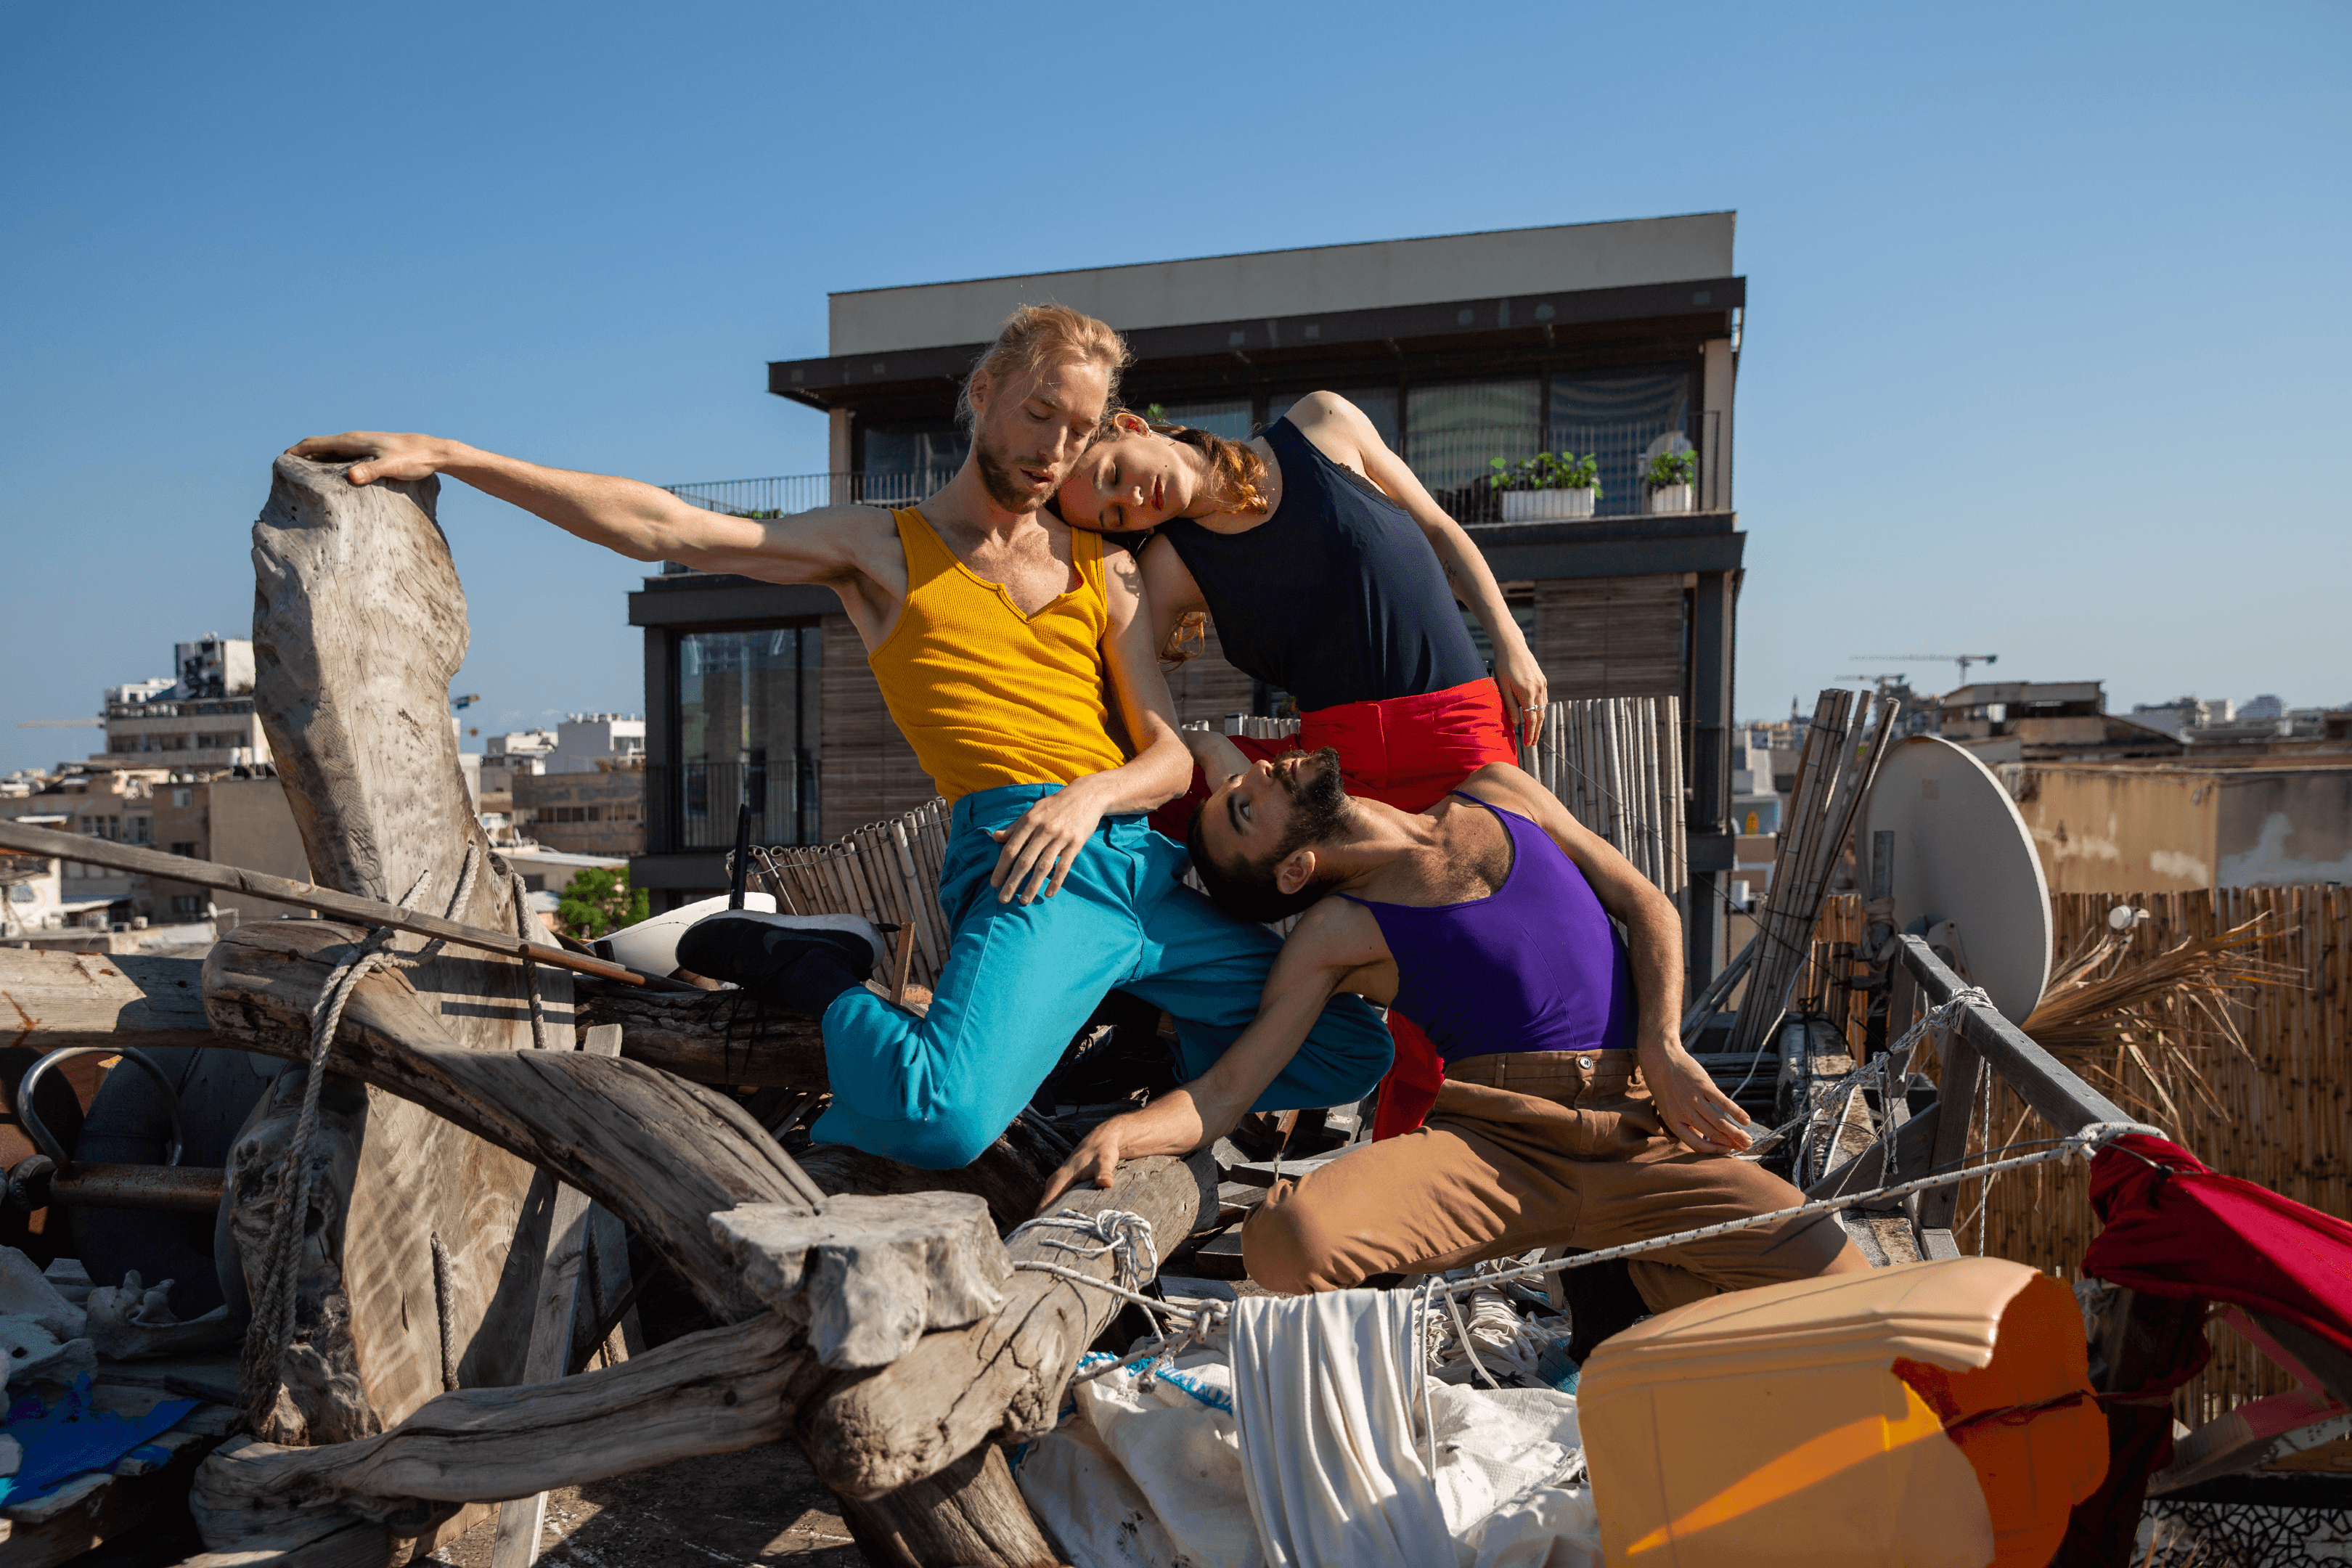 Dancers on Rooftops #116 - Billy, Gianni and Danai (Israel, 2022)